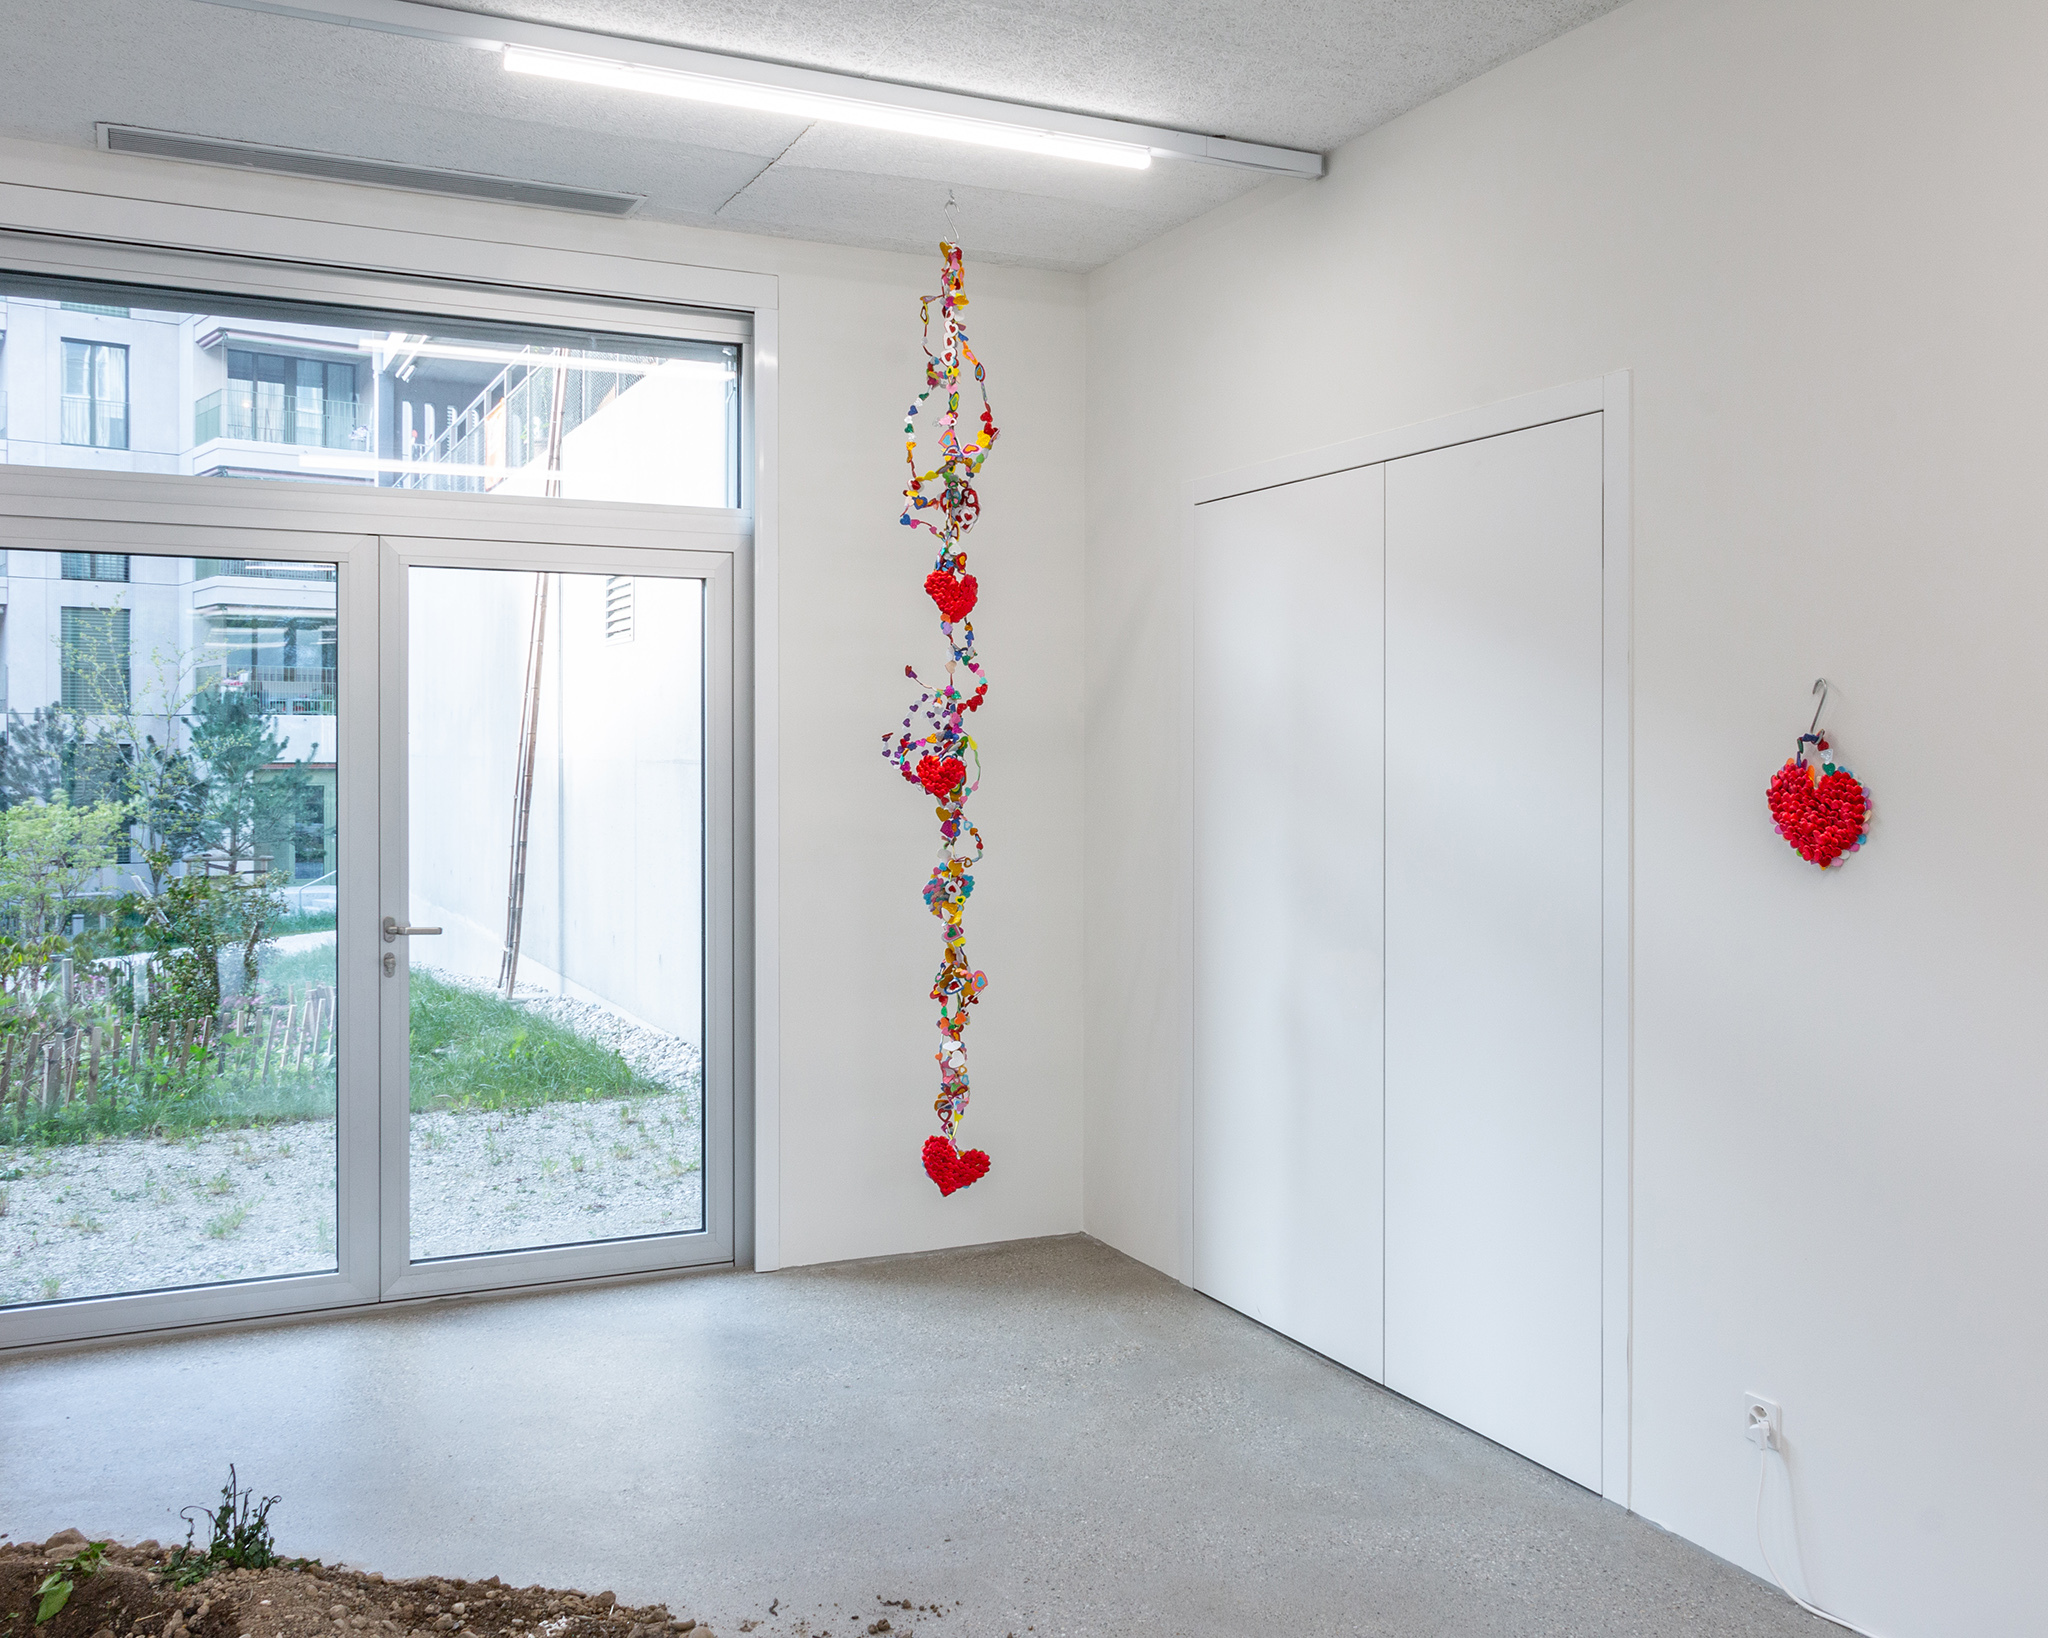 Exhibition view “Our Labor, Our Passion, Our Love”; Marisabel Arias, I am only for you; I am only for you love, 2024, sponge hearts, glitter, hook, CALM - Centre d'Art La Meute, 2024 / Photo: Théo Duﬂoo / Courtesy of the artist.